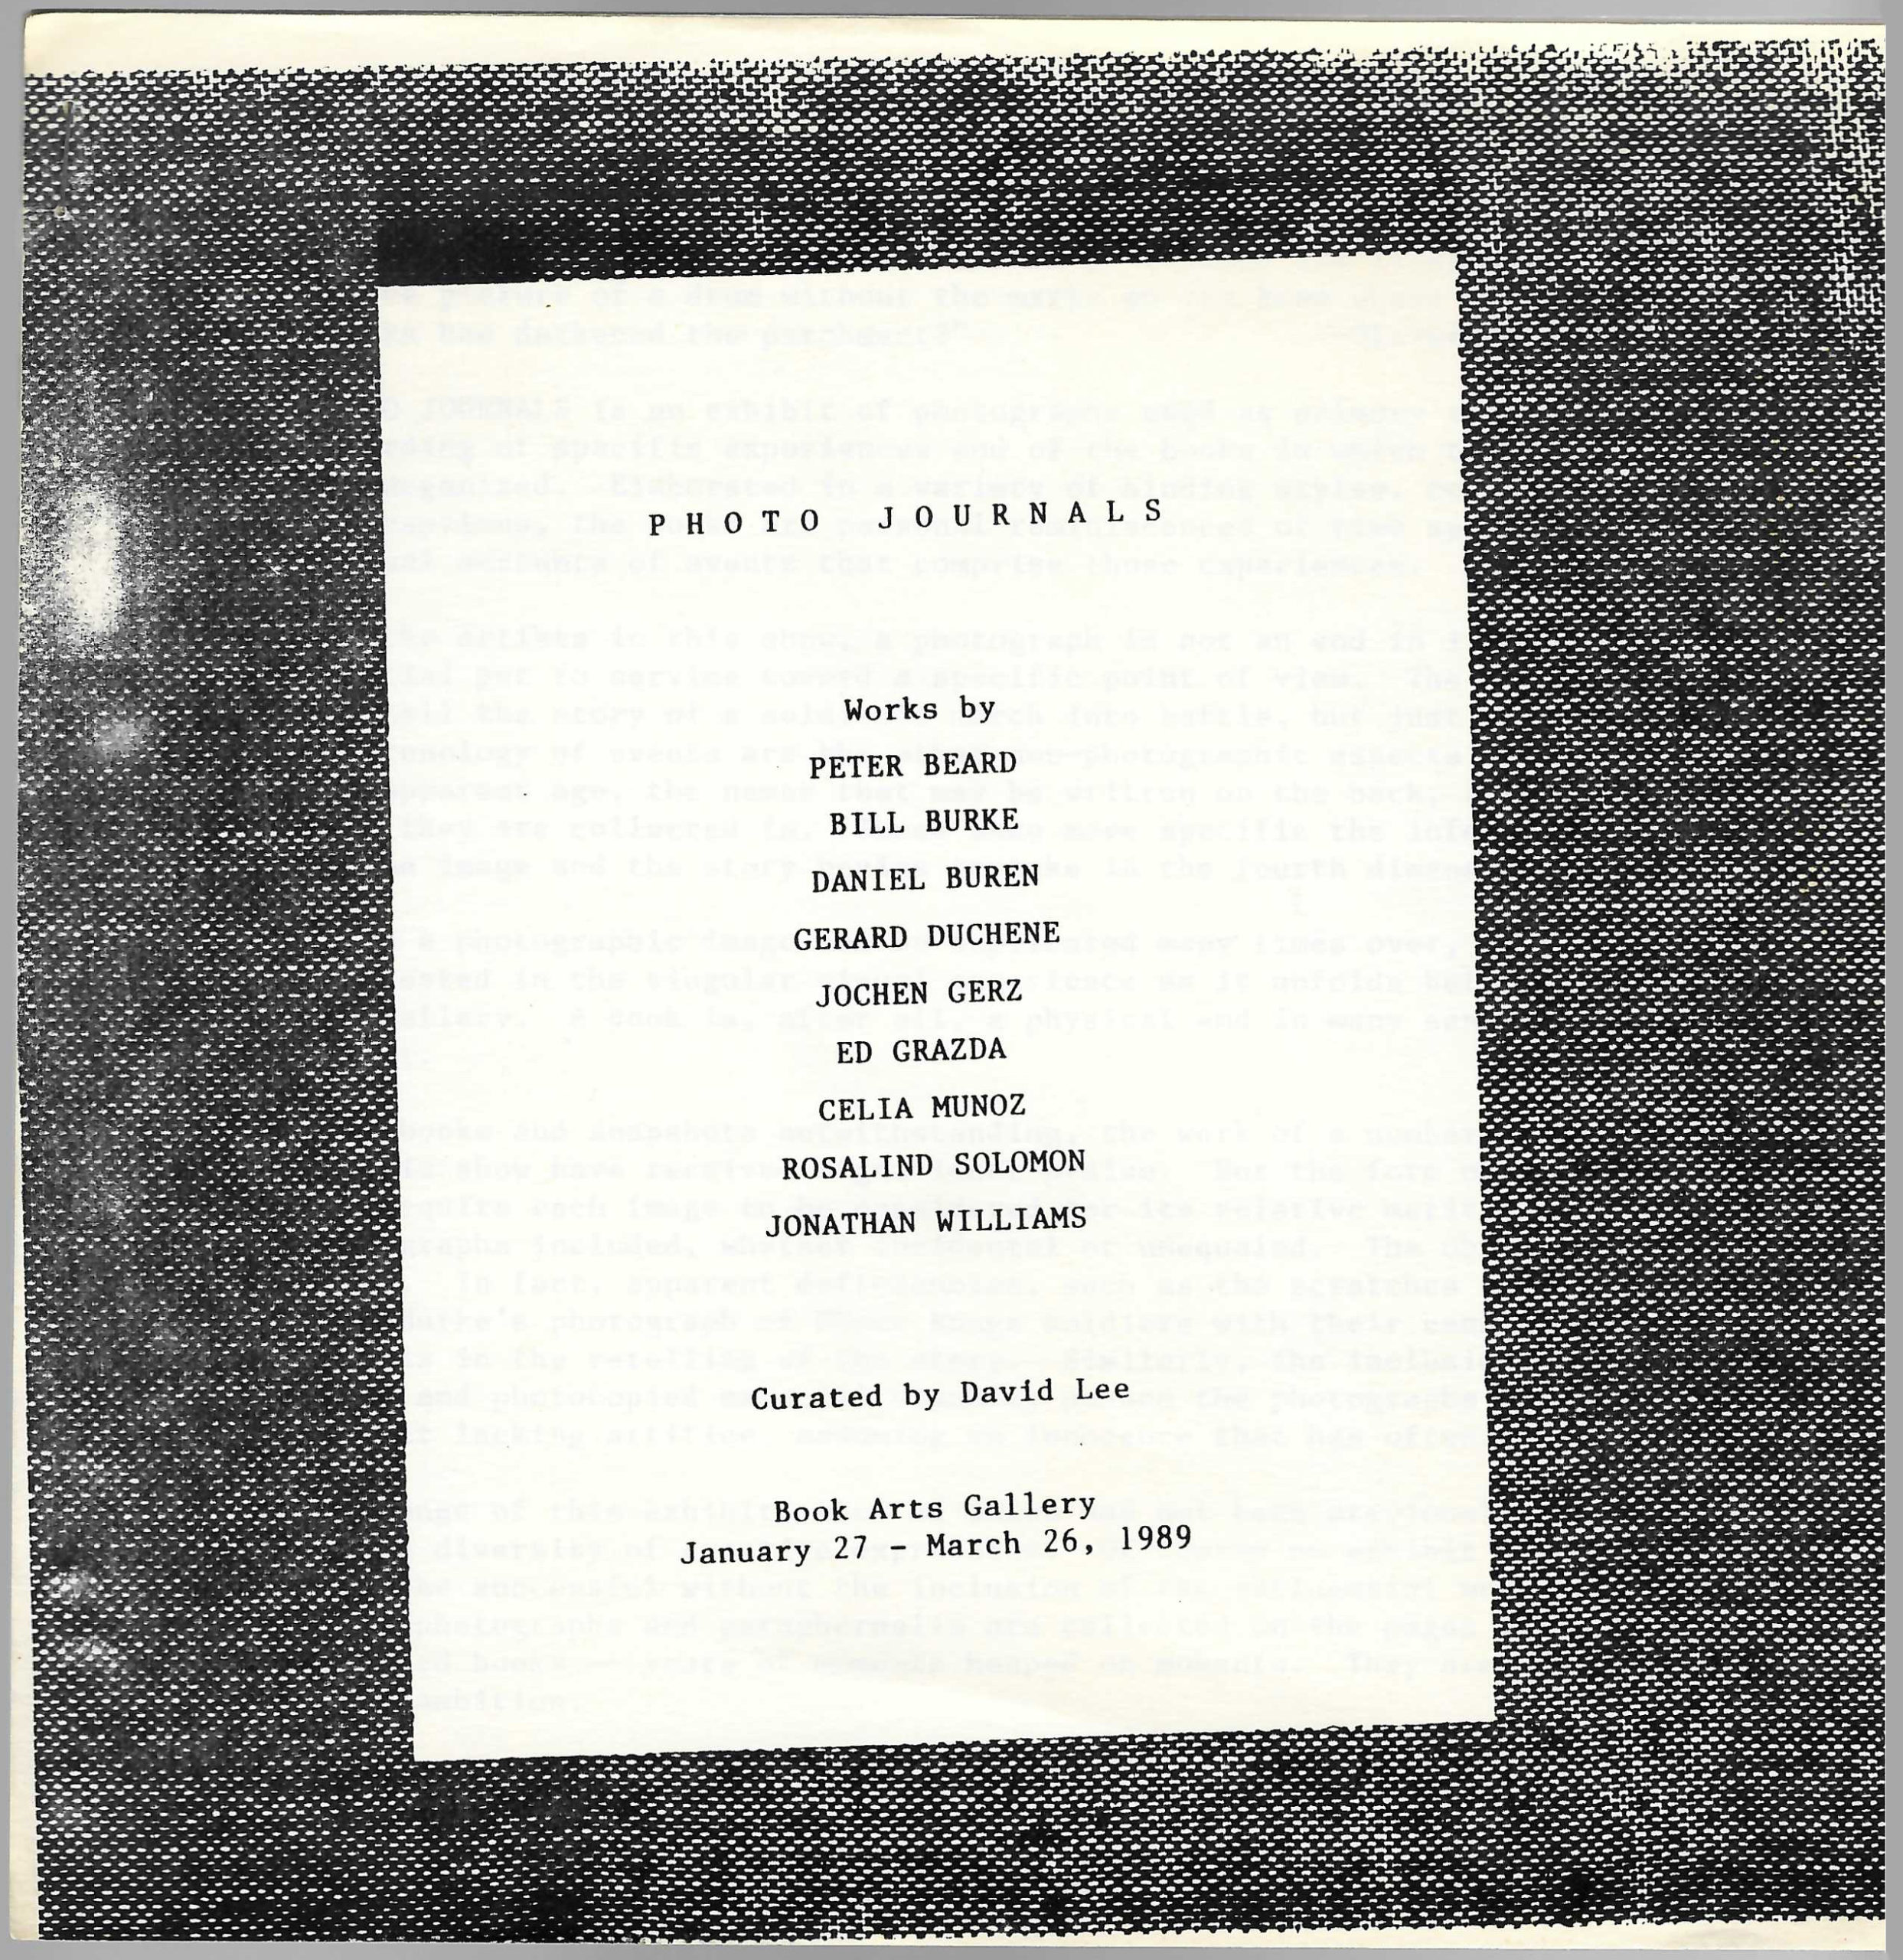 square black and white xerox catalogue cover with title and list of artists